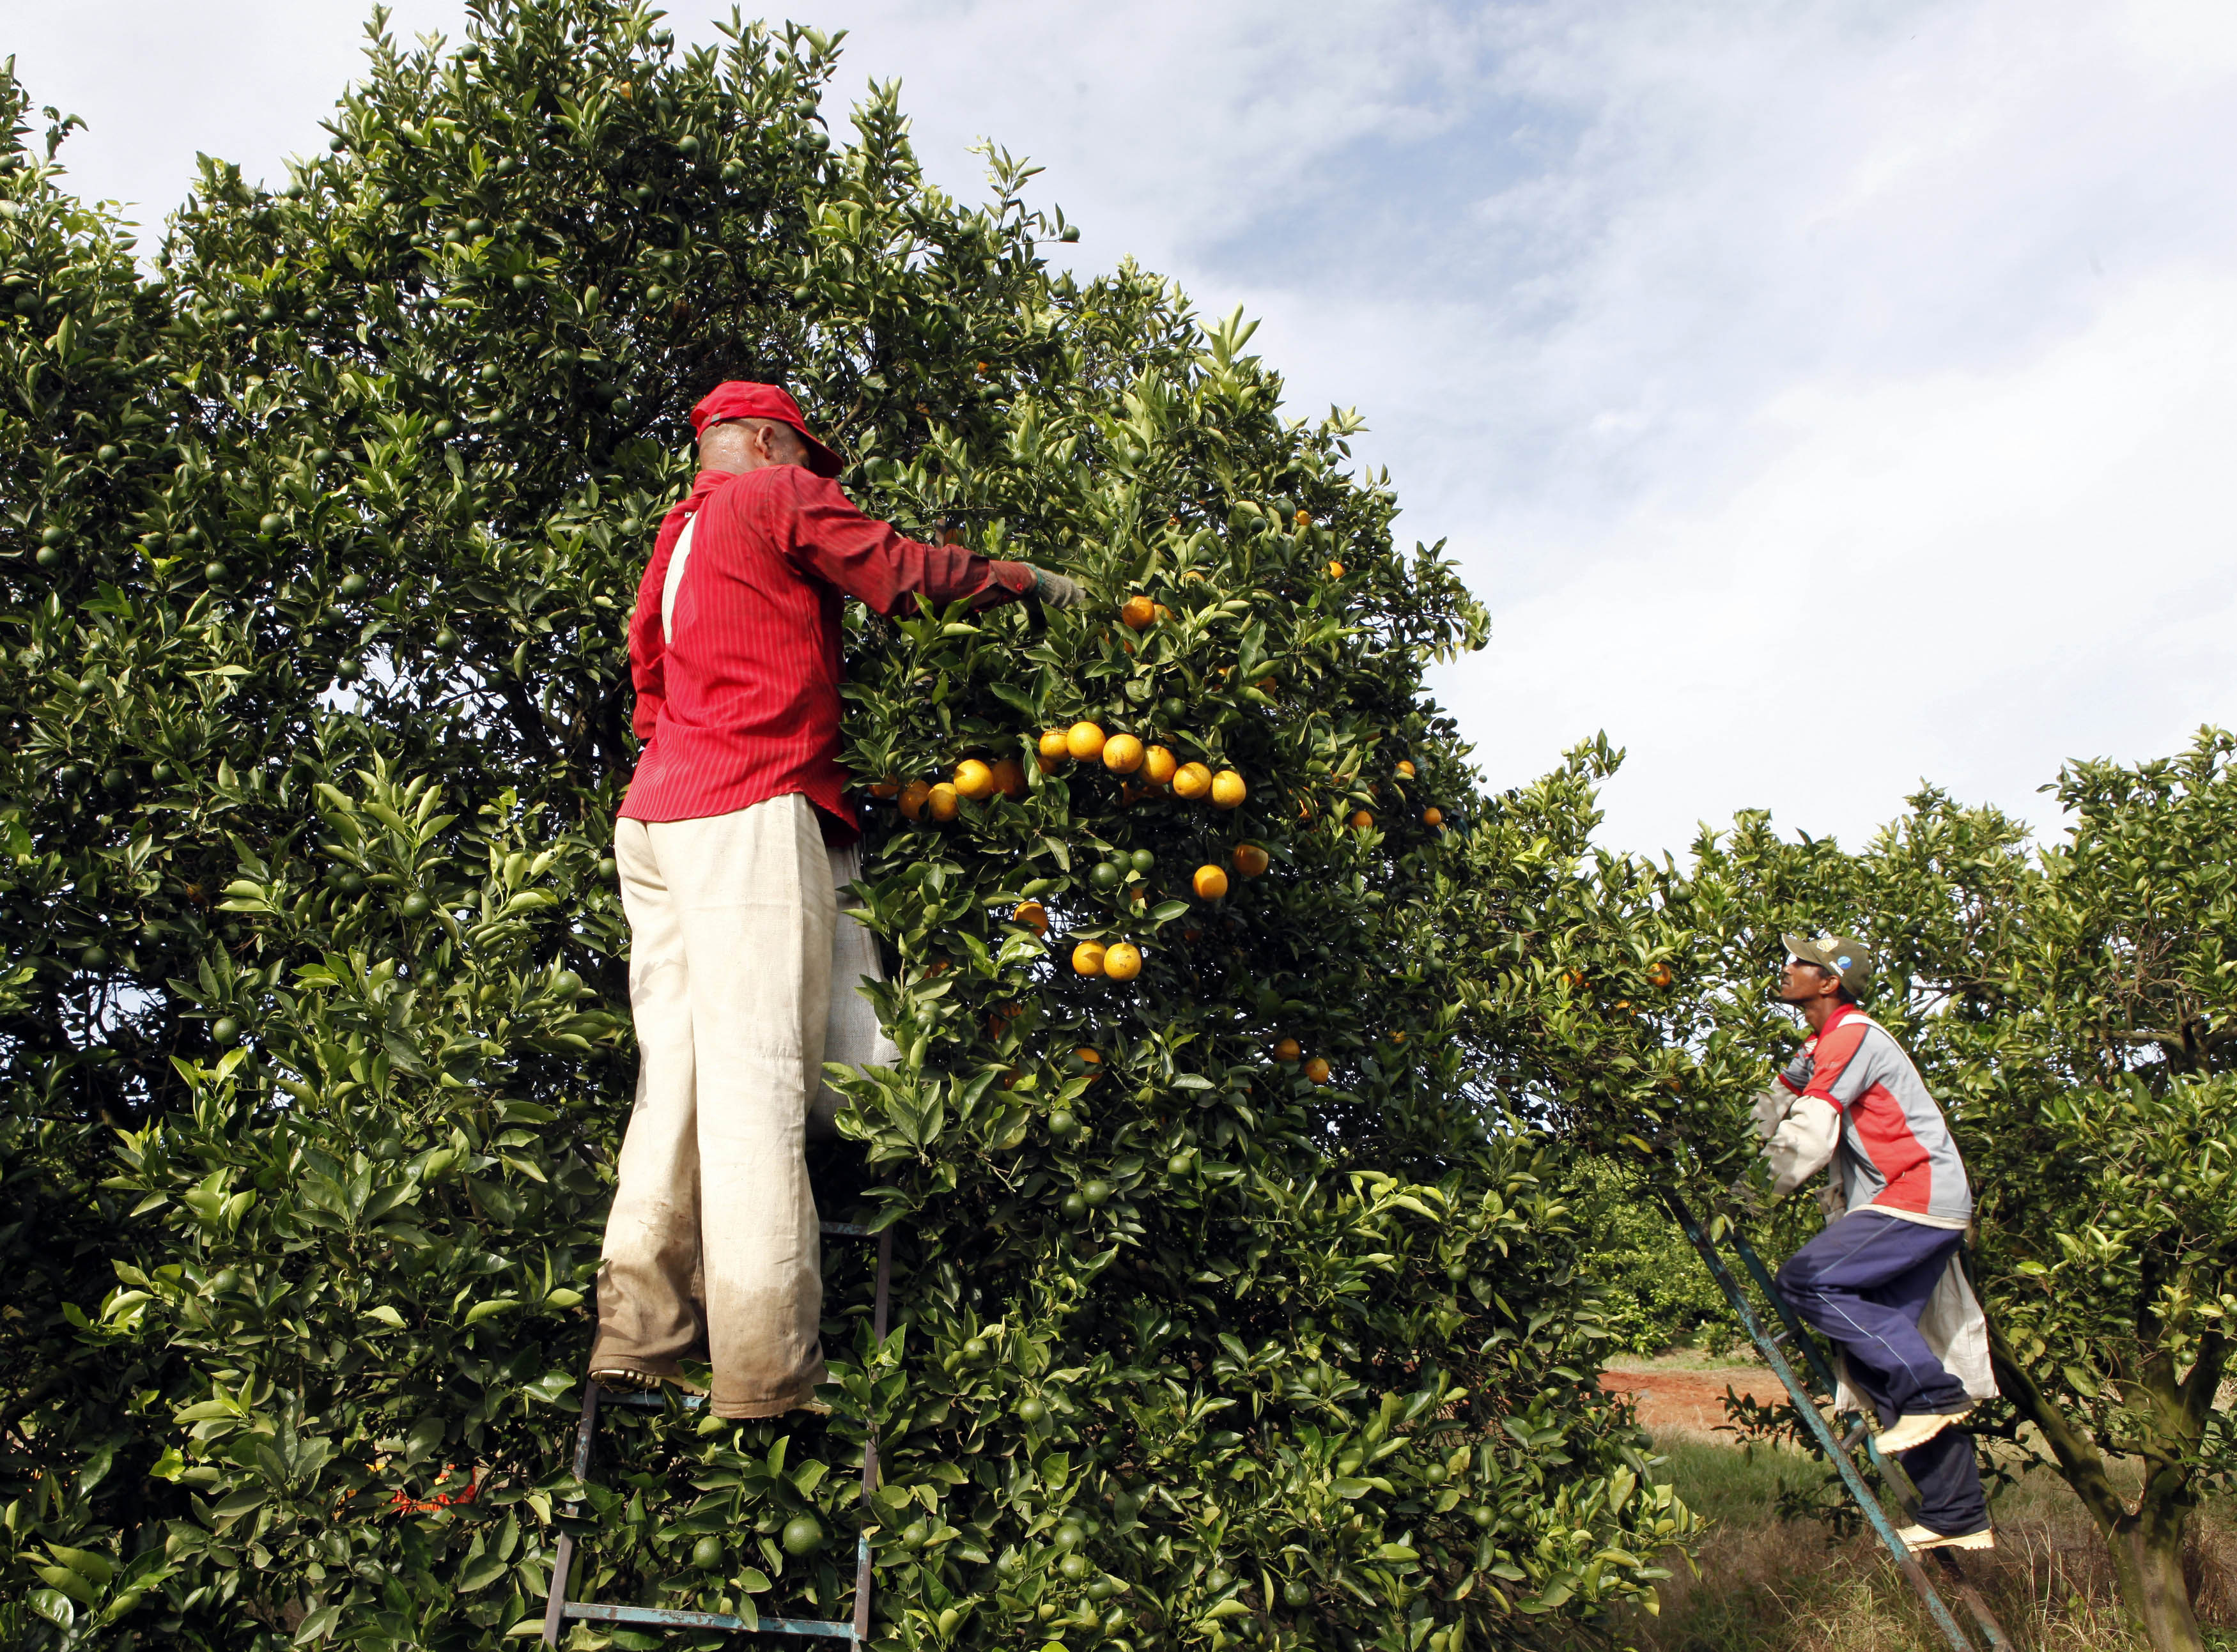 Workers harvest oranges on a farm in Limeira